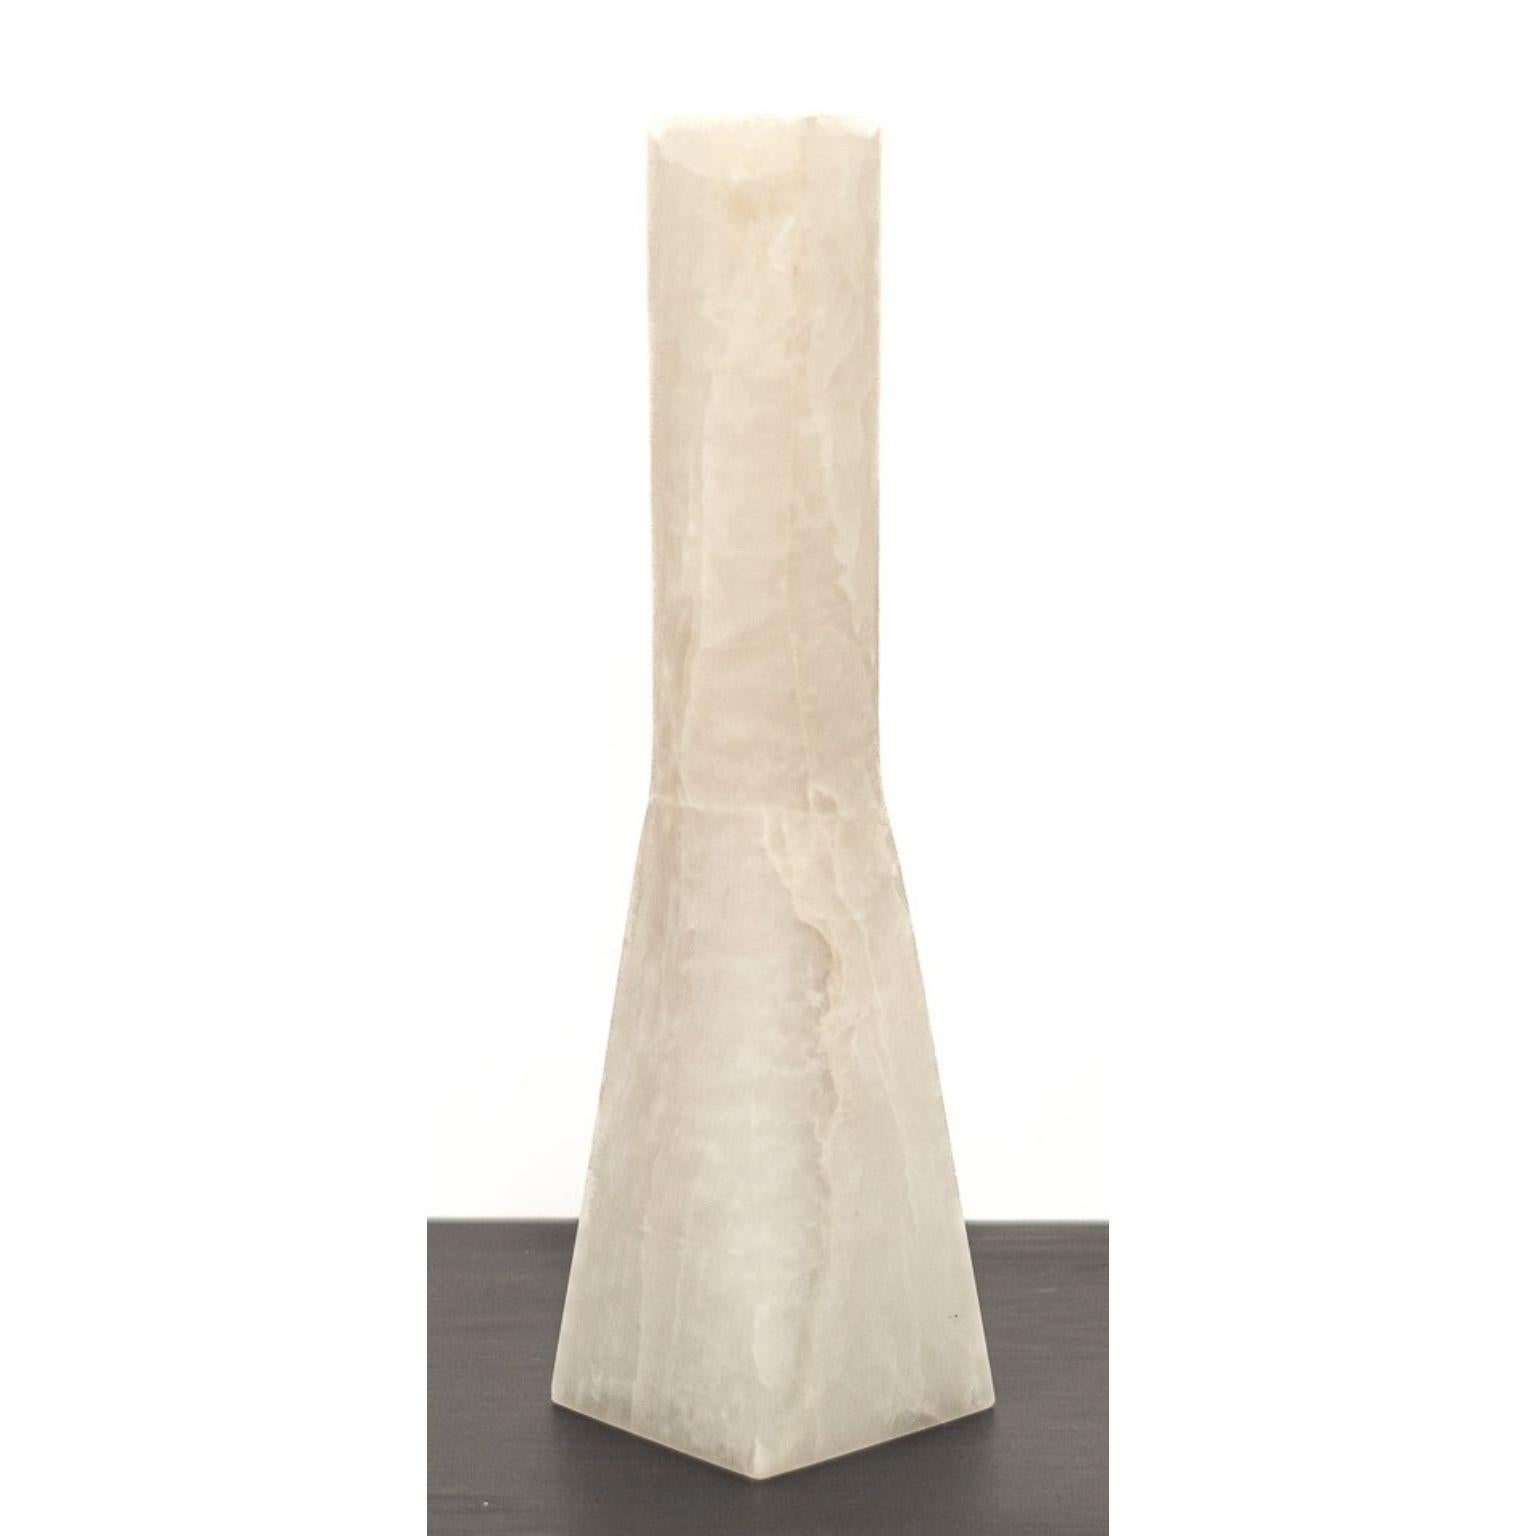 Ruta Vase by Lucas Tyra Morten
Limited Edition Of 10 Pieces.
Dimensions: W 10 x D 19 x H 40 cm.
Material: Natural onyx stone.

Occupying the liminal space between art and design, the multidisciplinary atelier of Lucas and Tyra Morten is a small